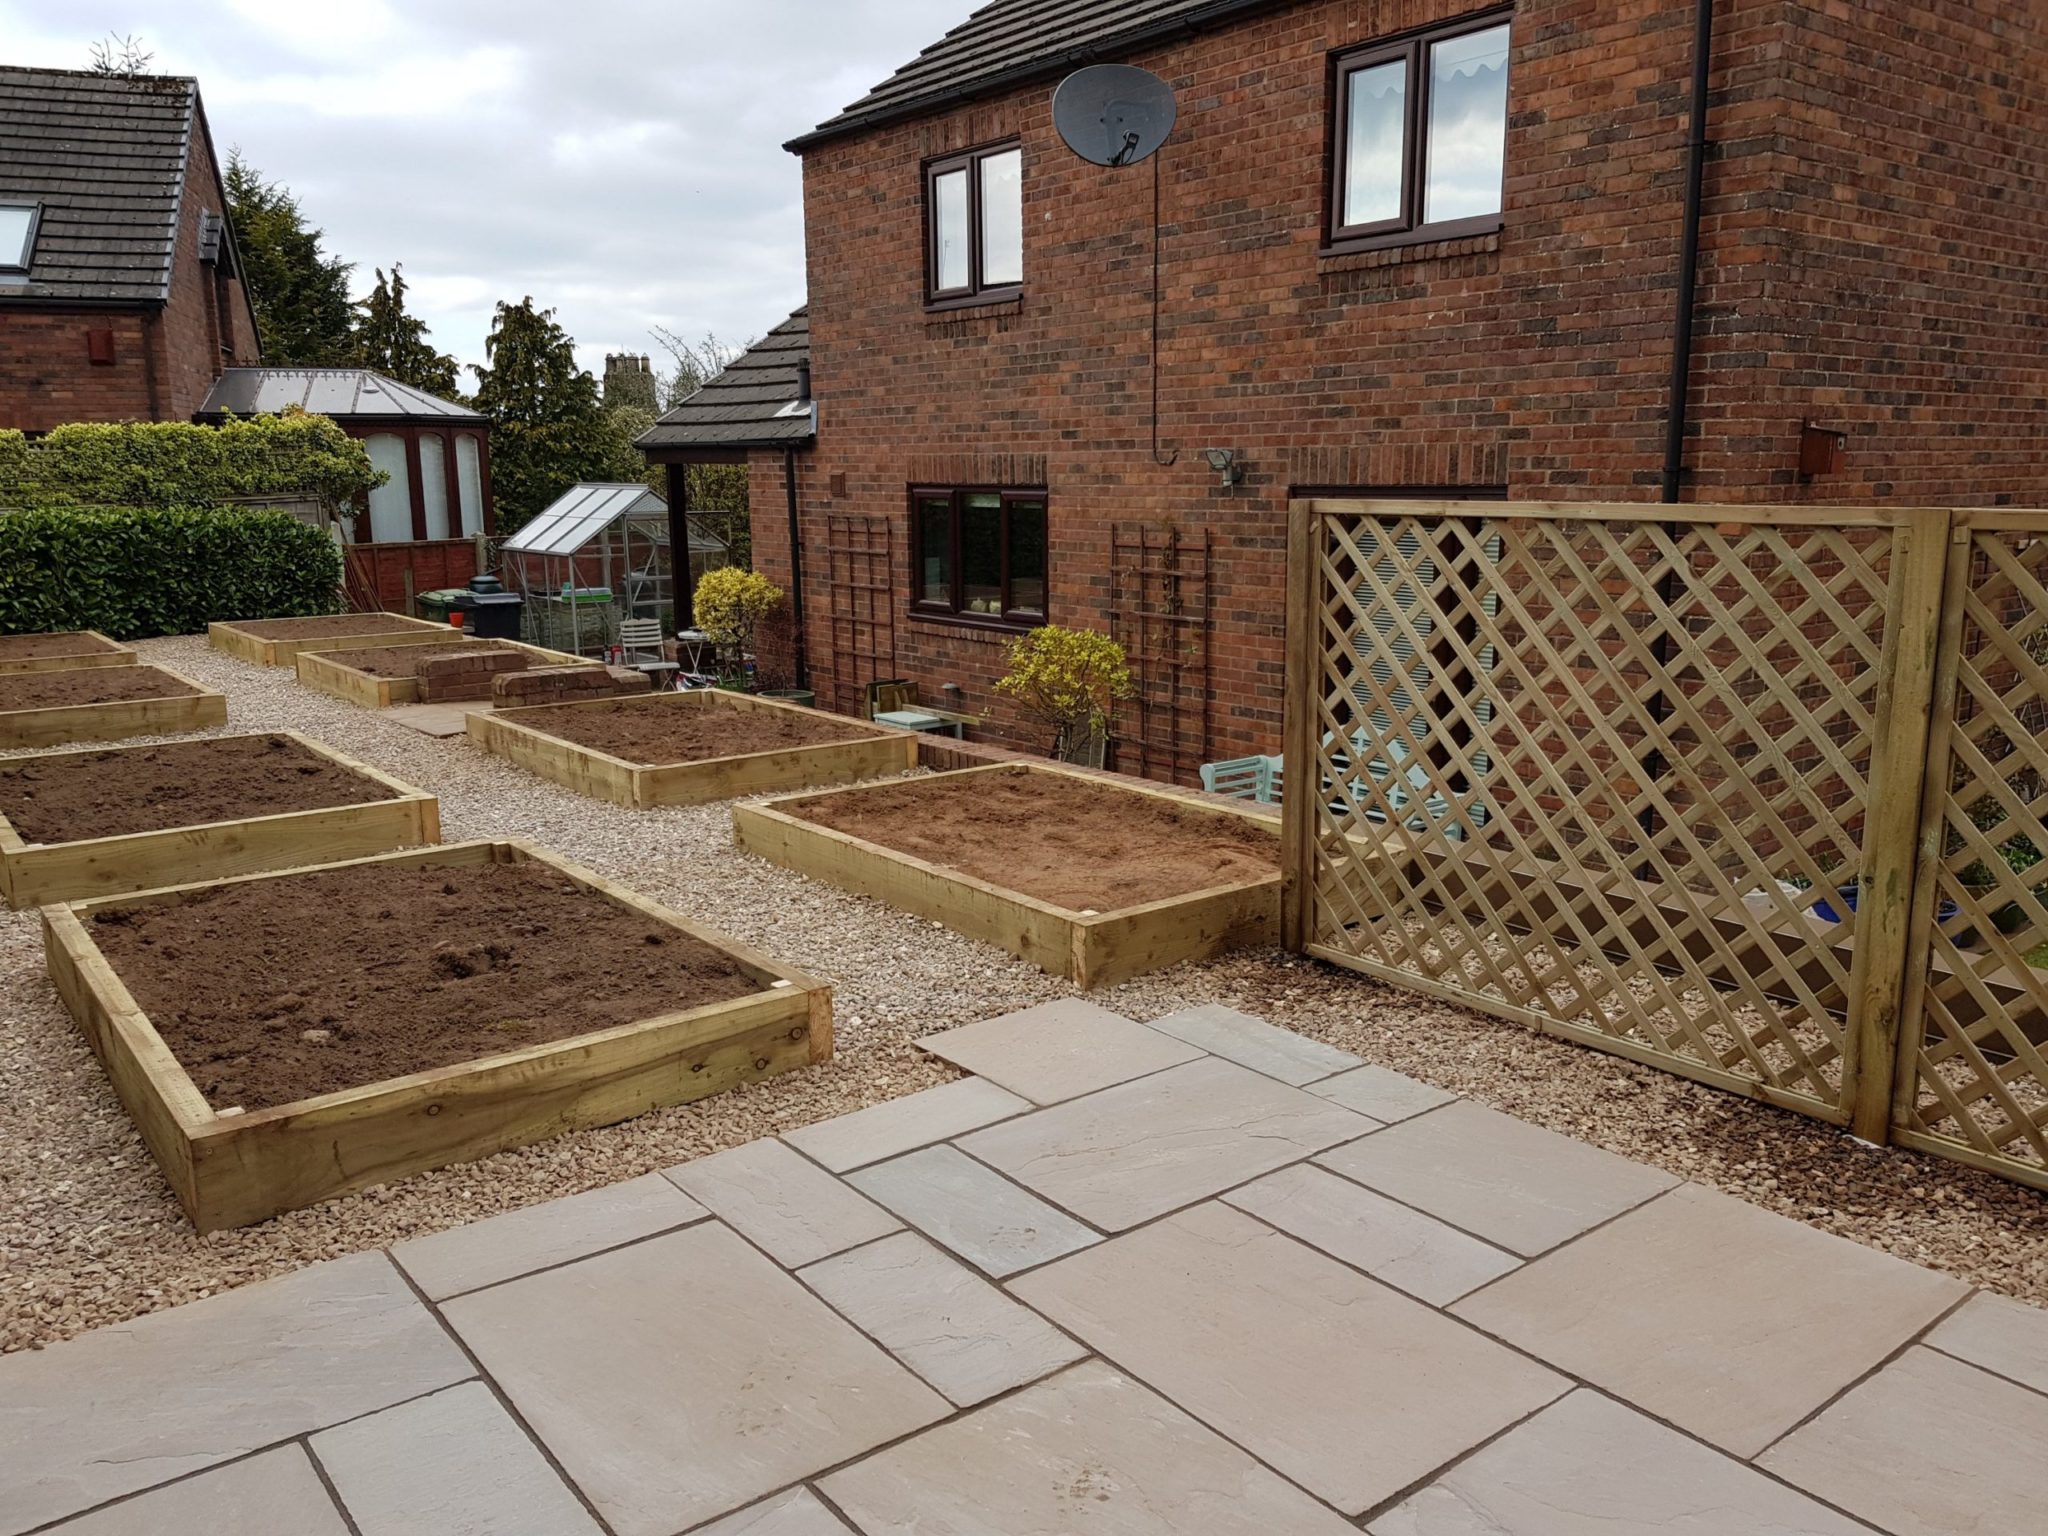 stone patio and wooden planters we landscaped in Brampton Cumbria